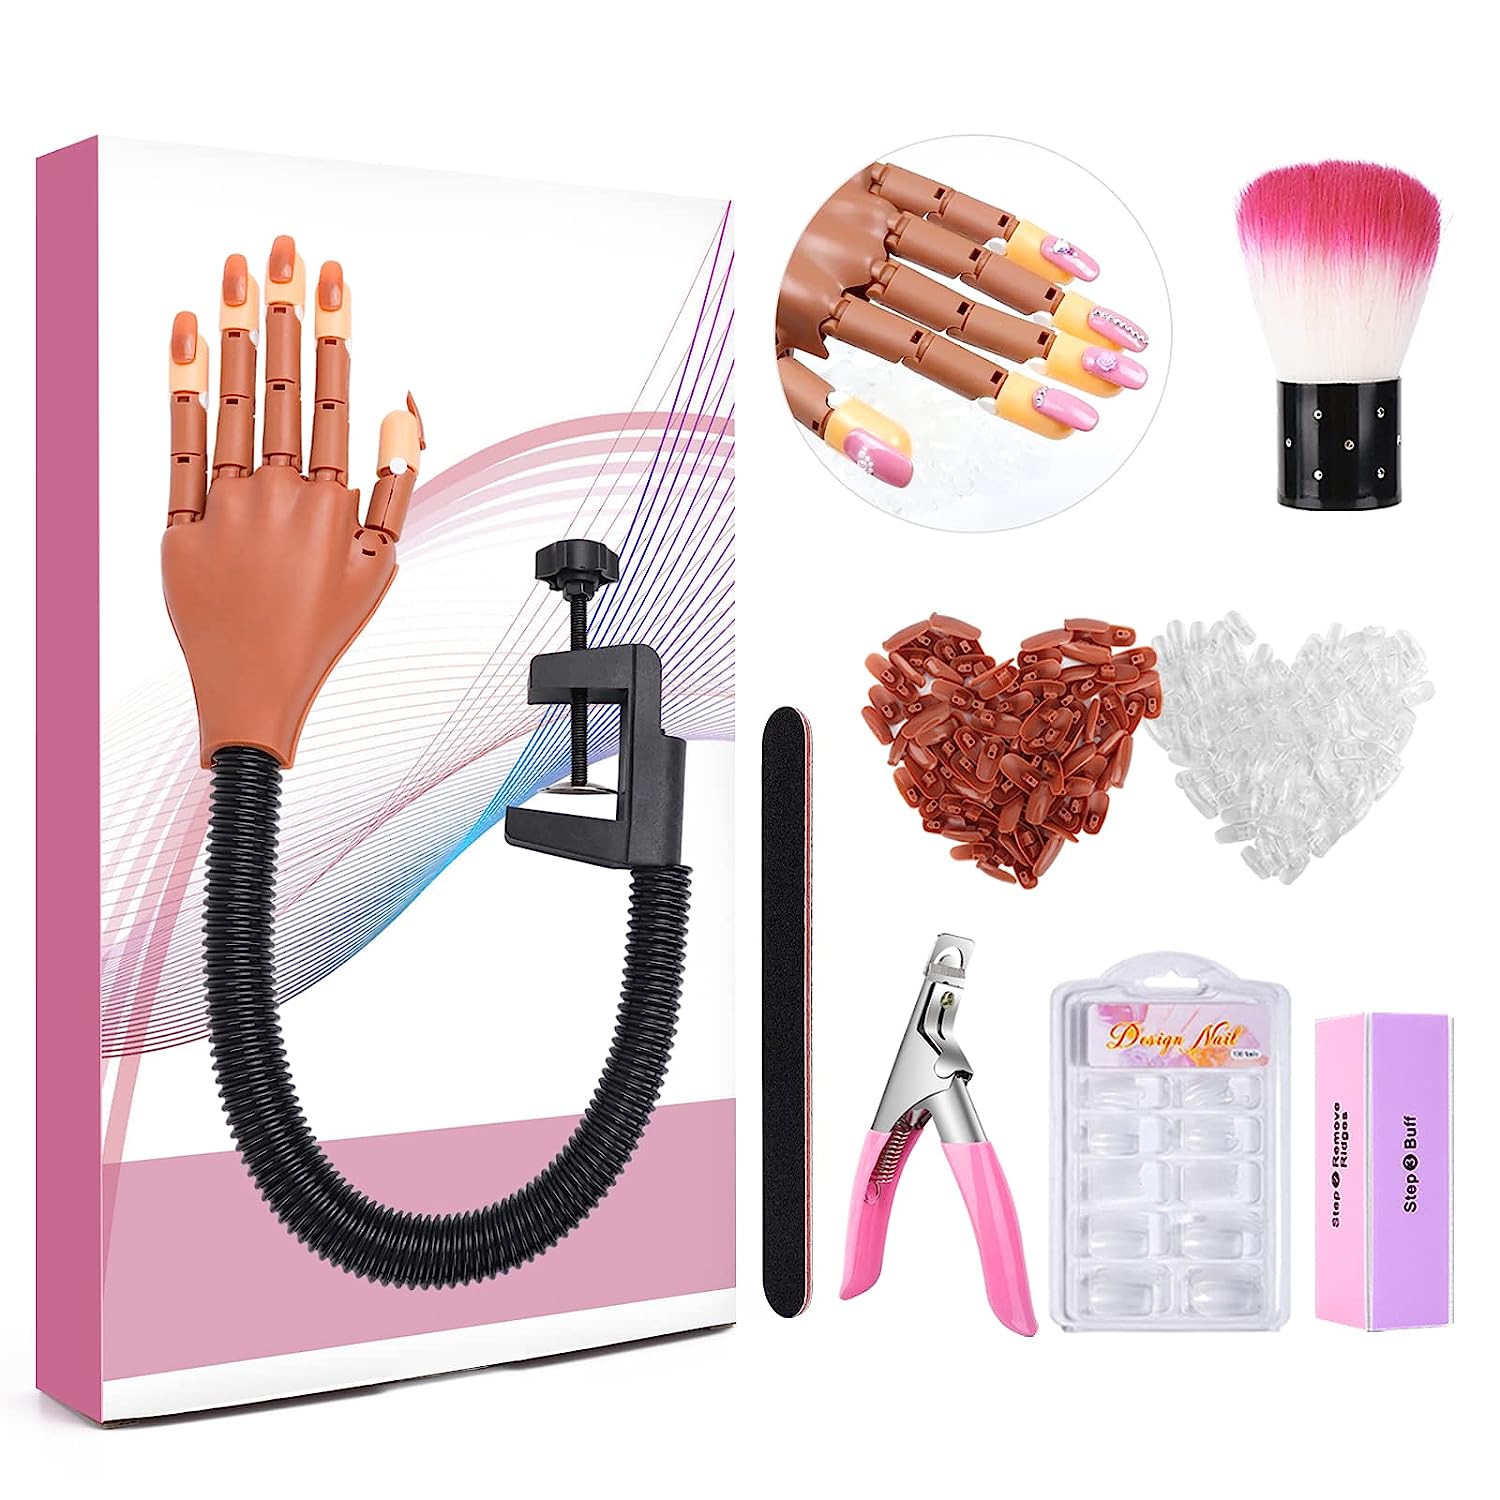 Nails Trainning Practice Hand For Acrylic Nail, Adjustable Fake Model Hands  For Nails Practice, Flexible Movable Nail Tools Kits With Nail File, Nail